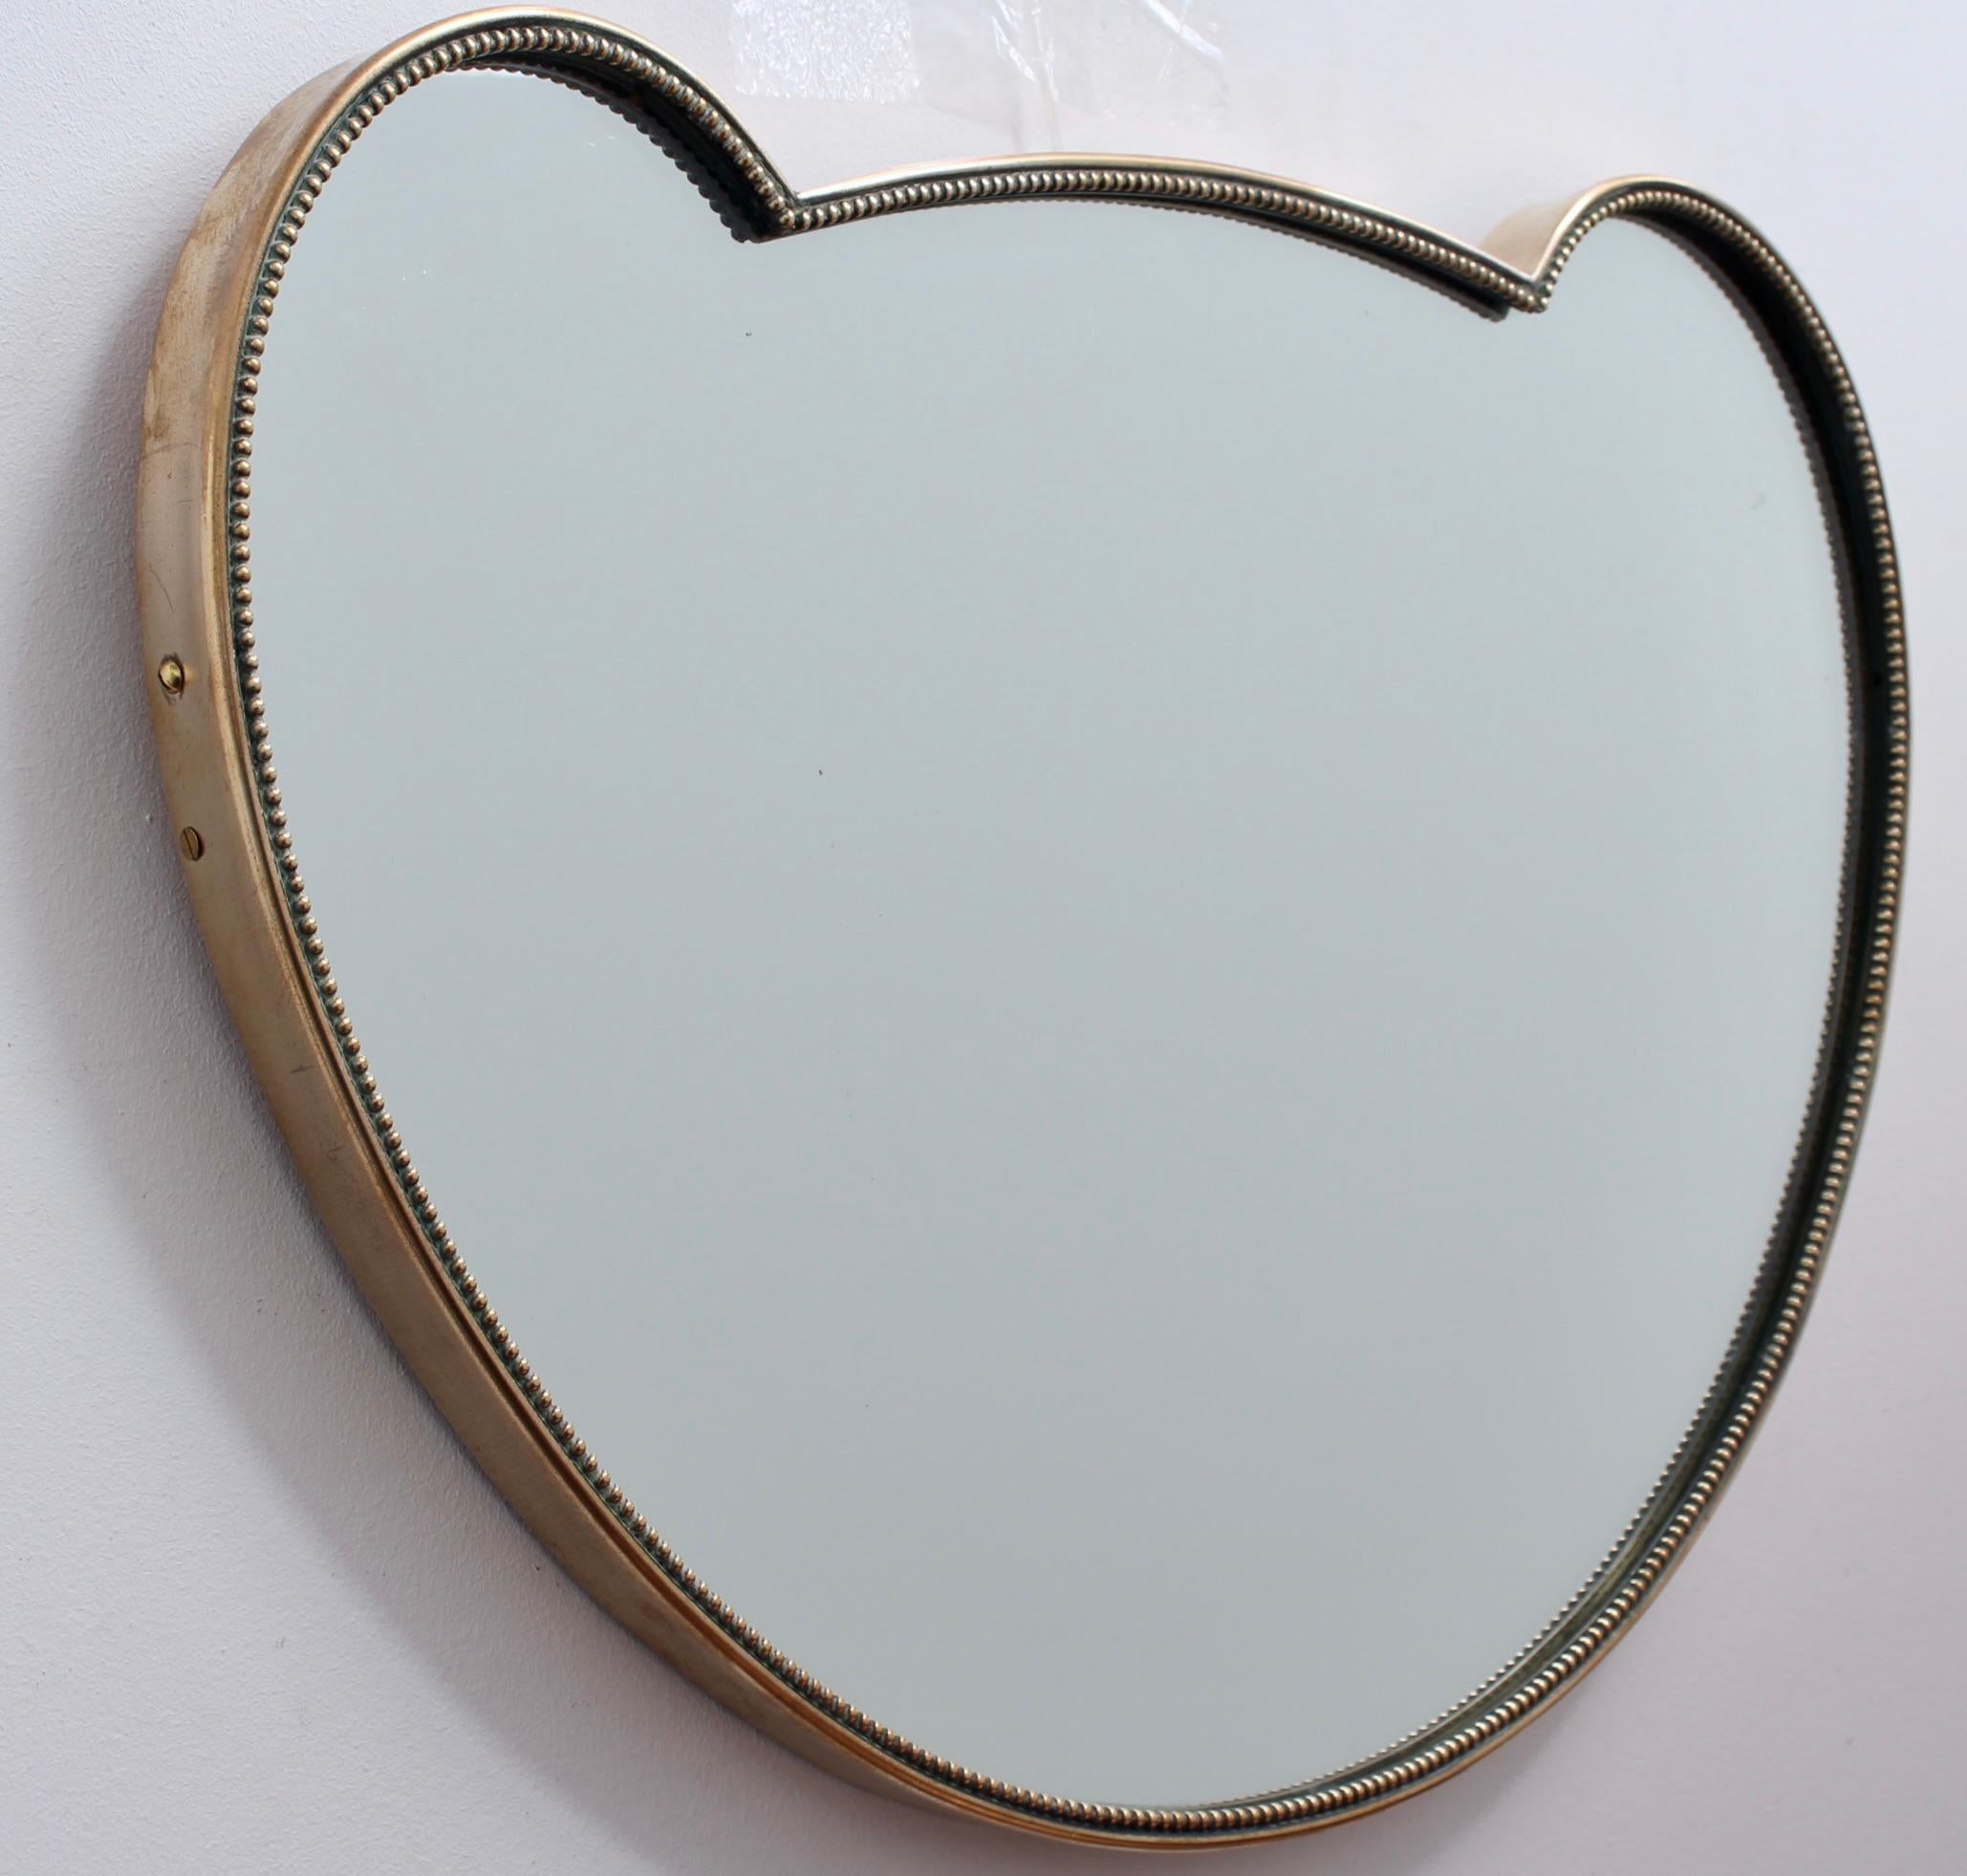 Italian Vintage Wall Mirror with Brass Frame (circa 1950s) - Small In Good Condition For Sale In London, GB